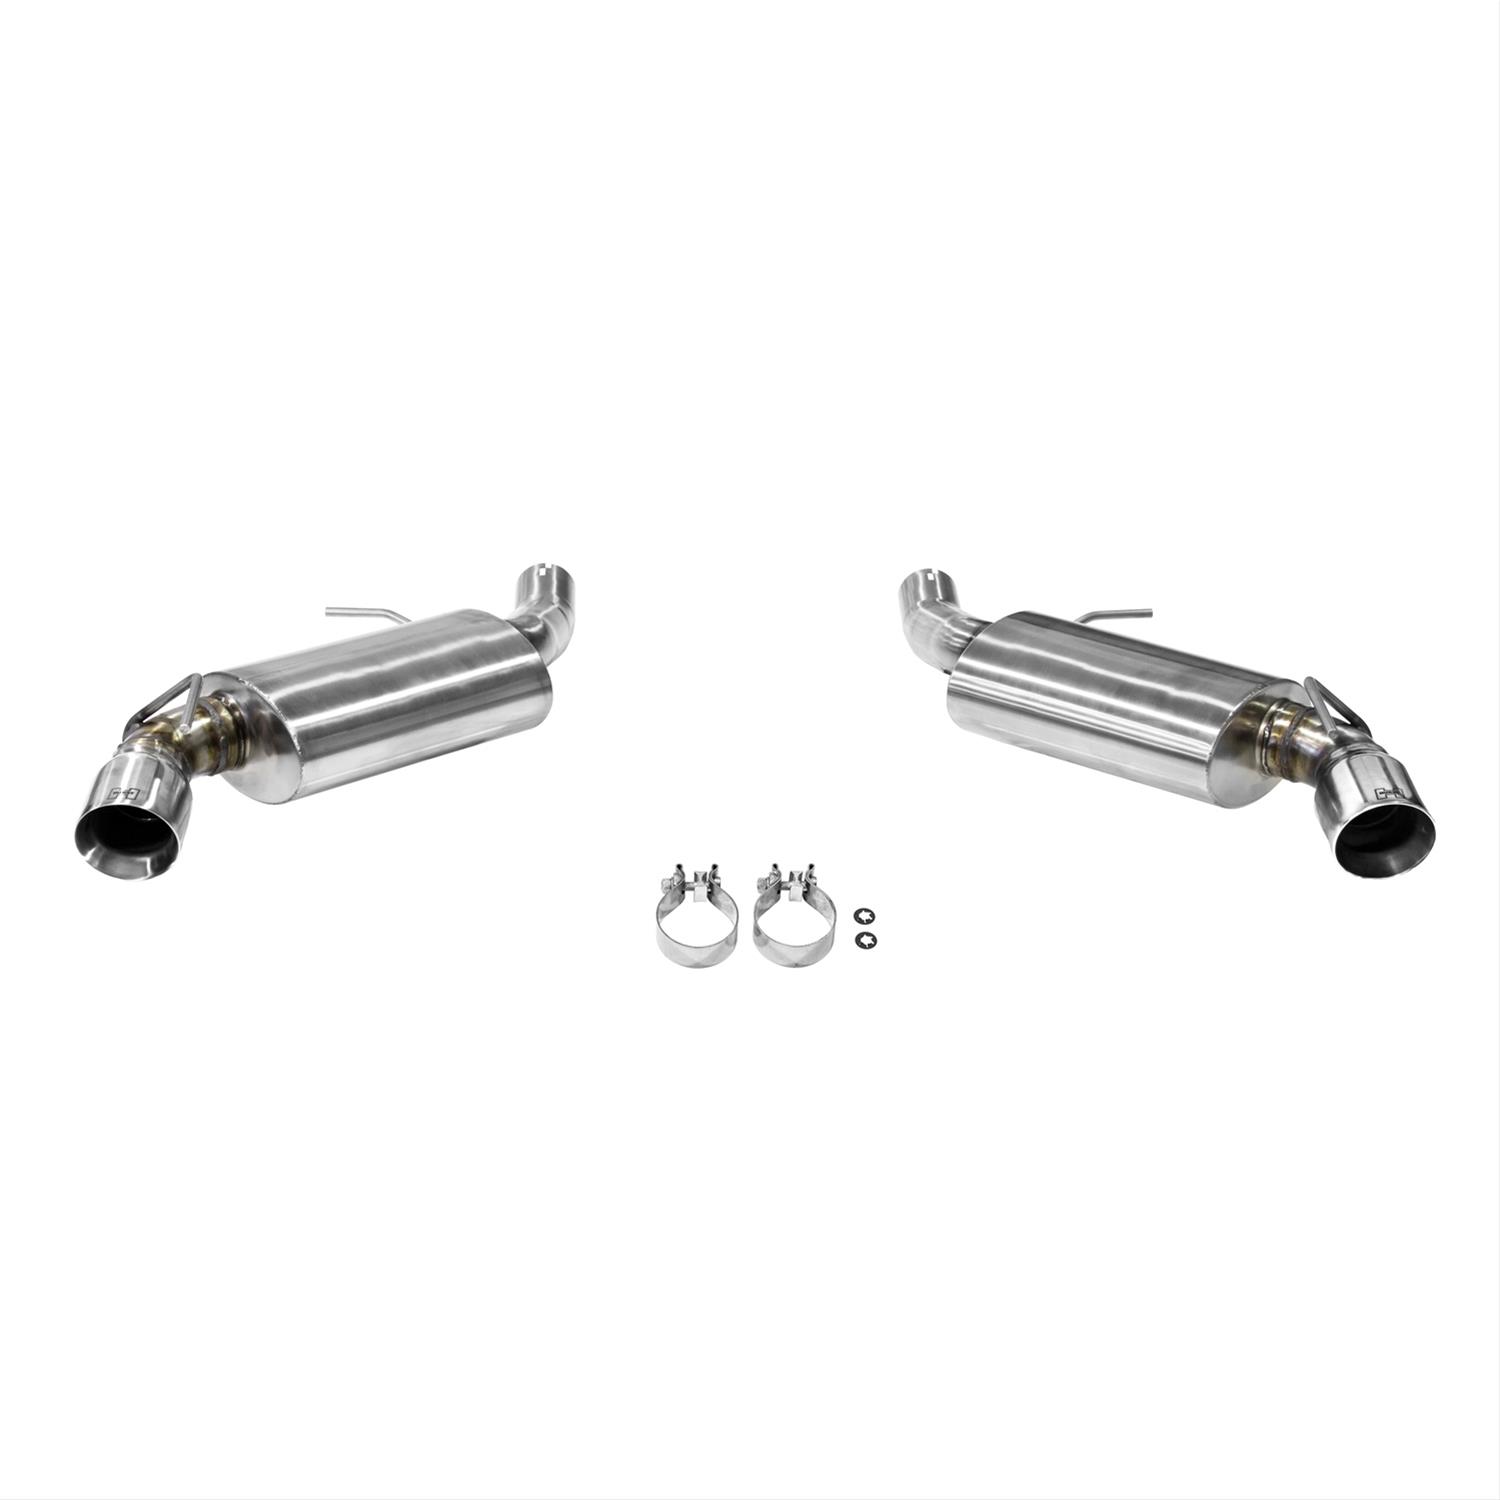 2016+ Camaro SS 6.2L V8 Flowmaster Force II 304 Stainless Steel Axle Back Exhaust Kit